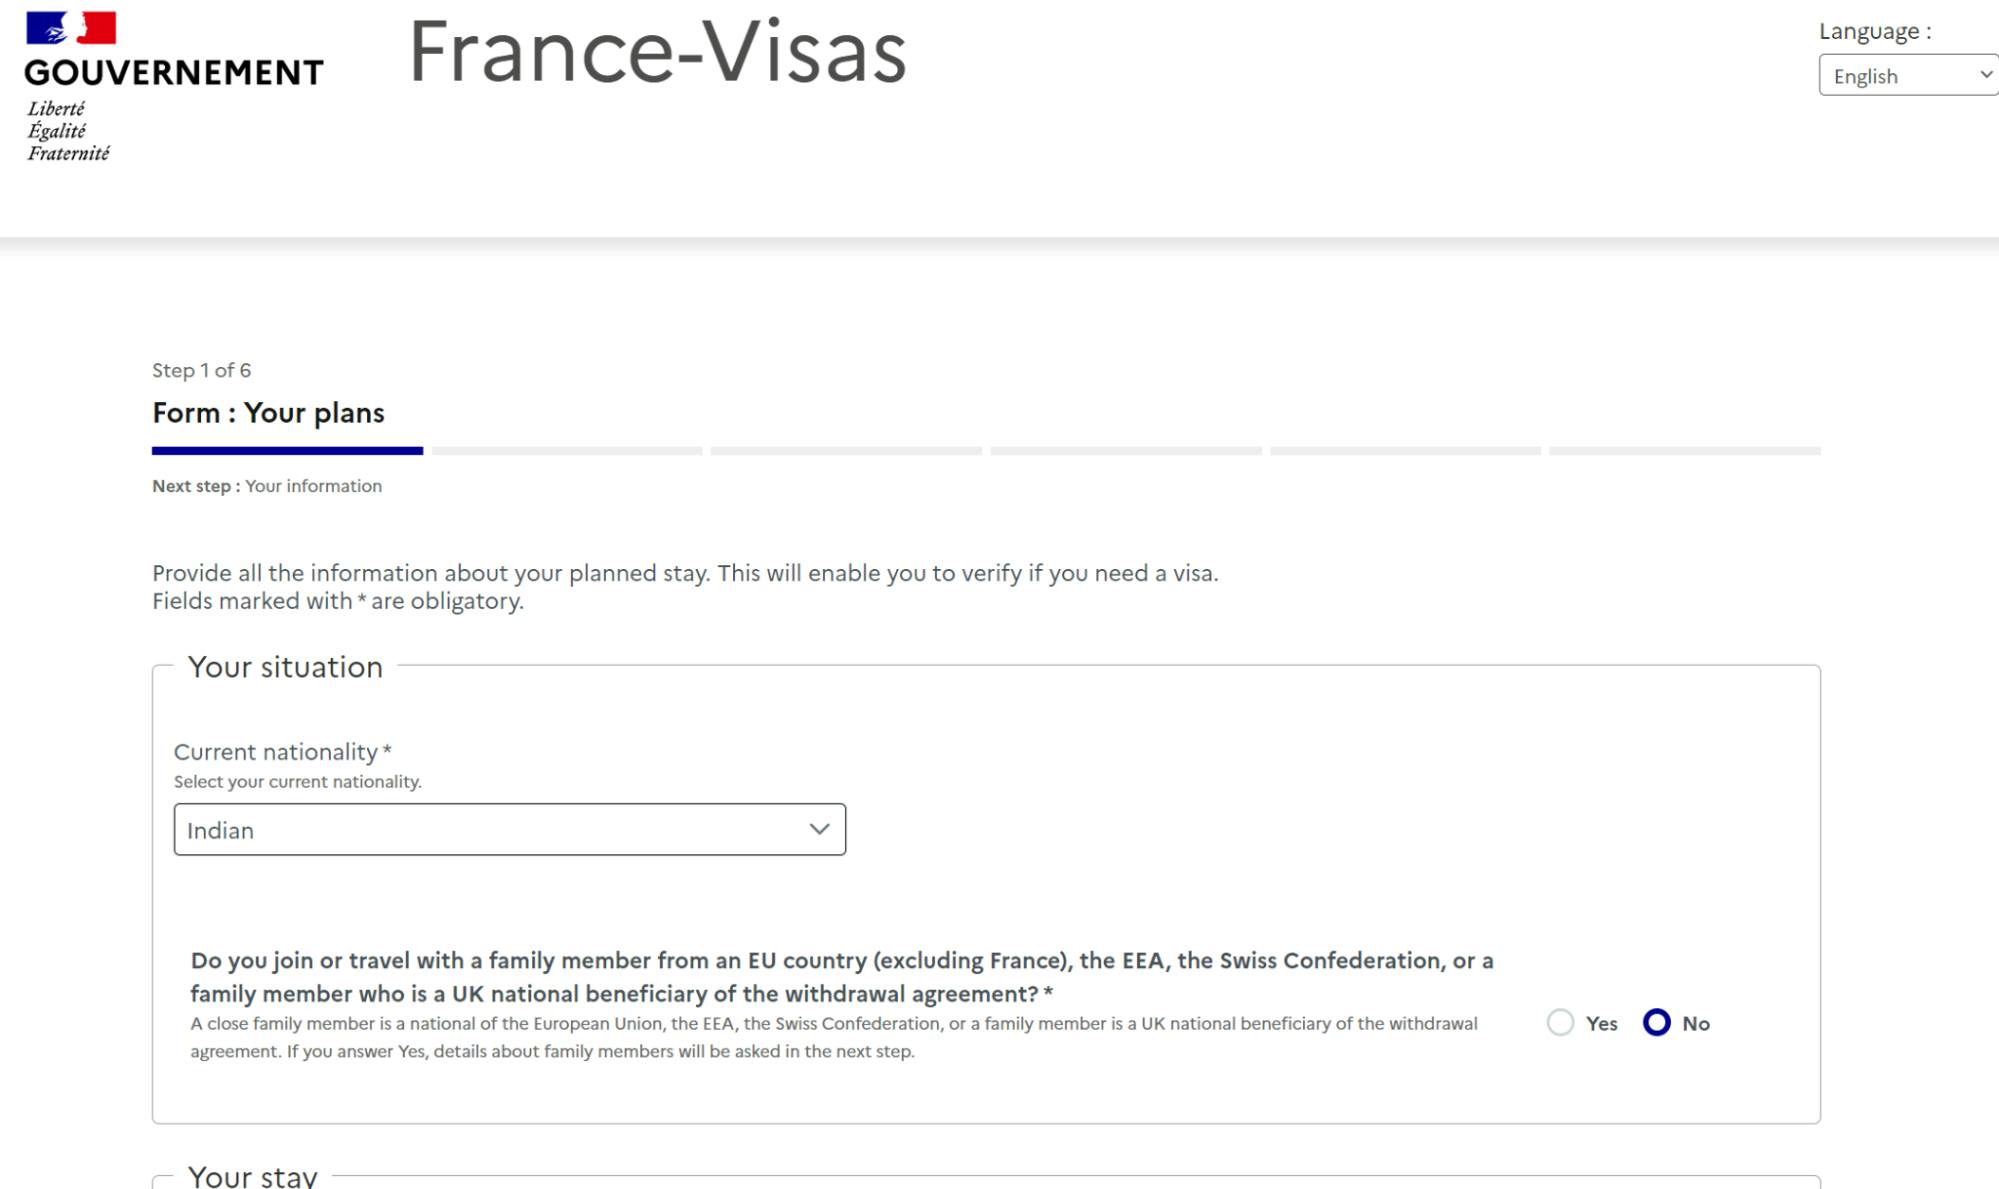 Business Visa to France through VFS Global